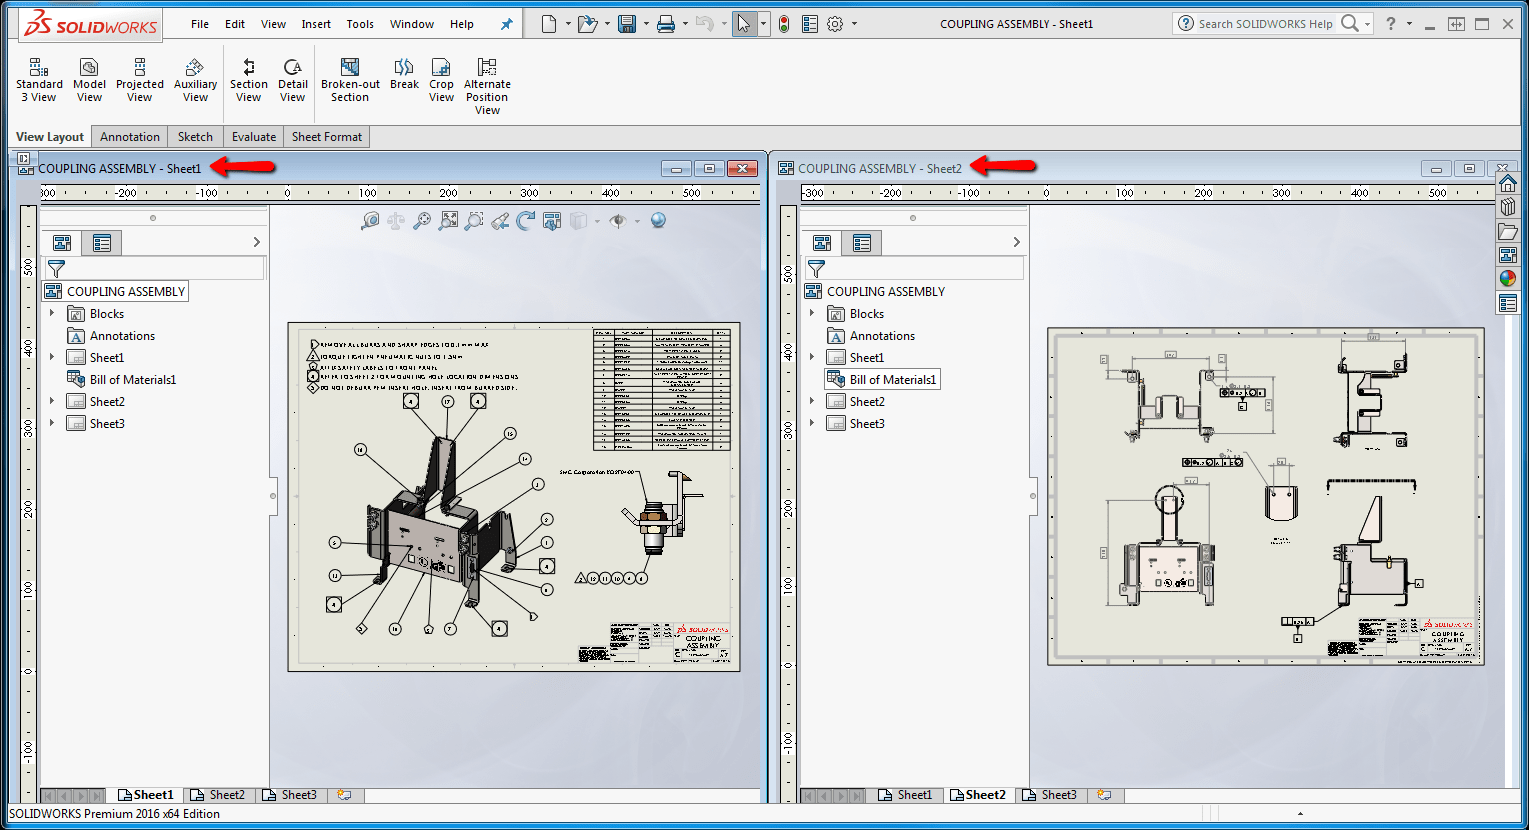 SOLIDWORKS: A "New Window" to Productivityimage003